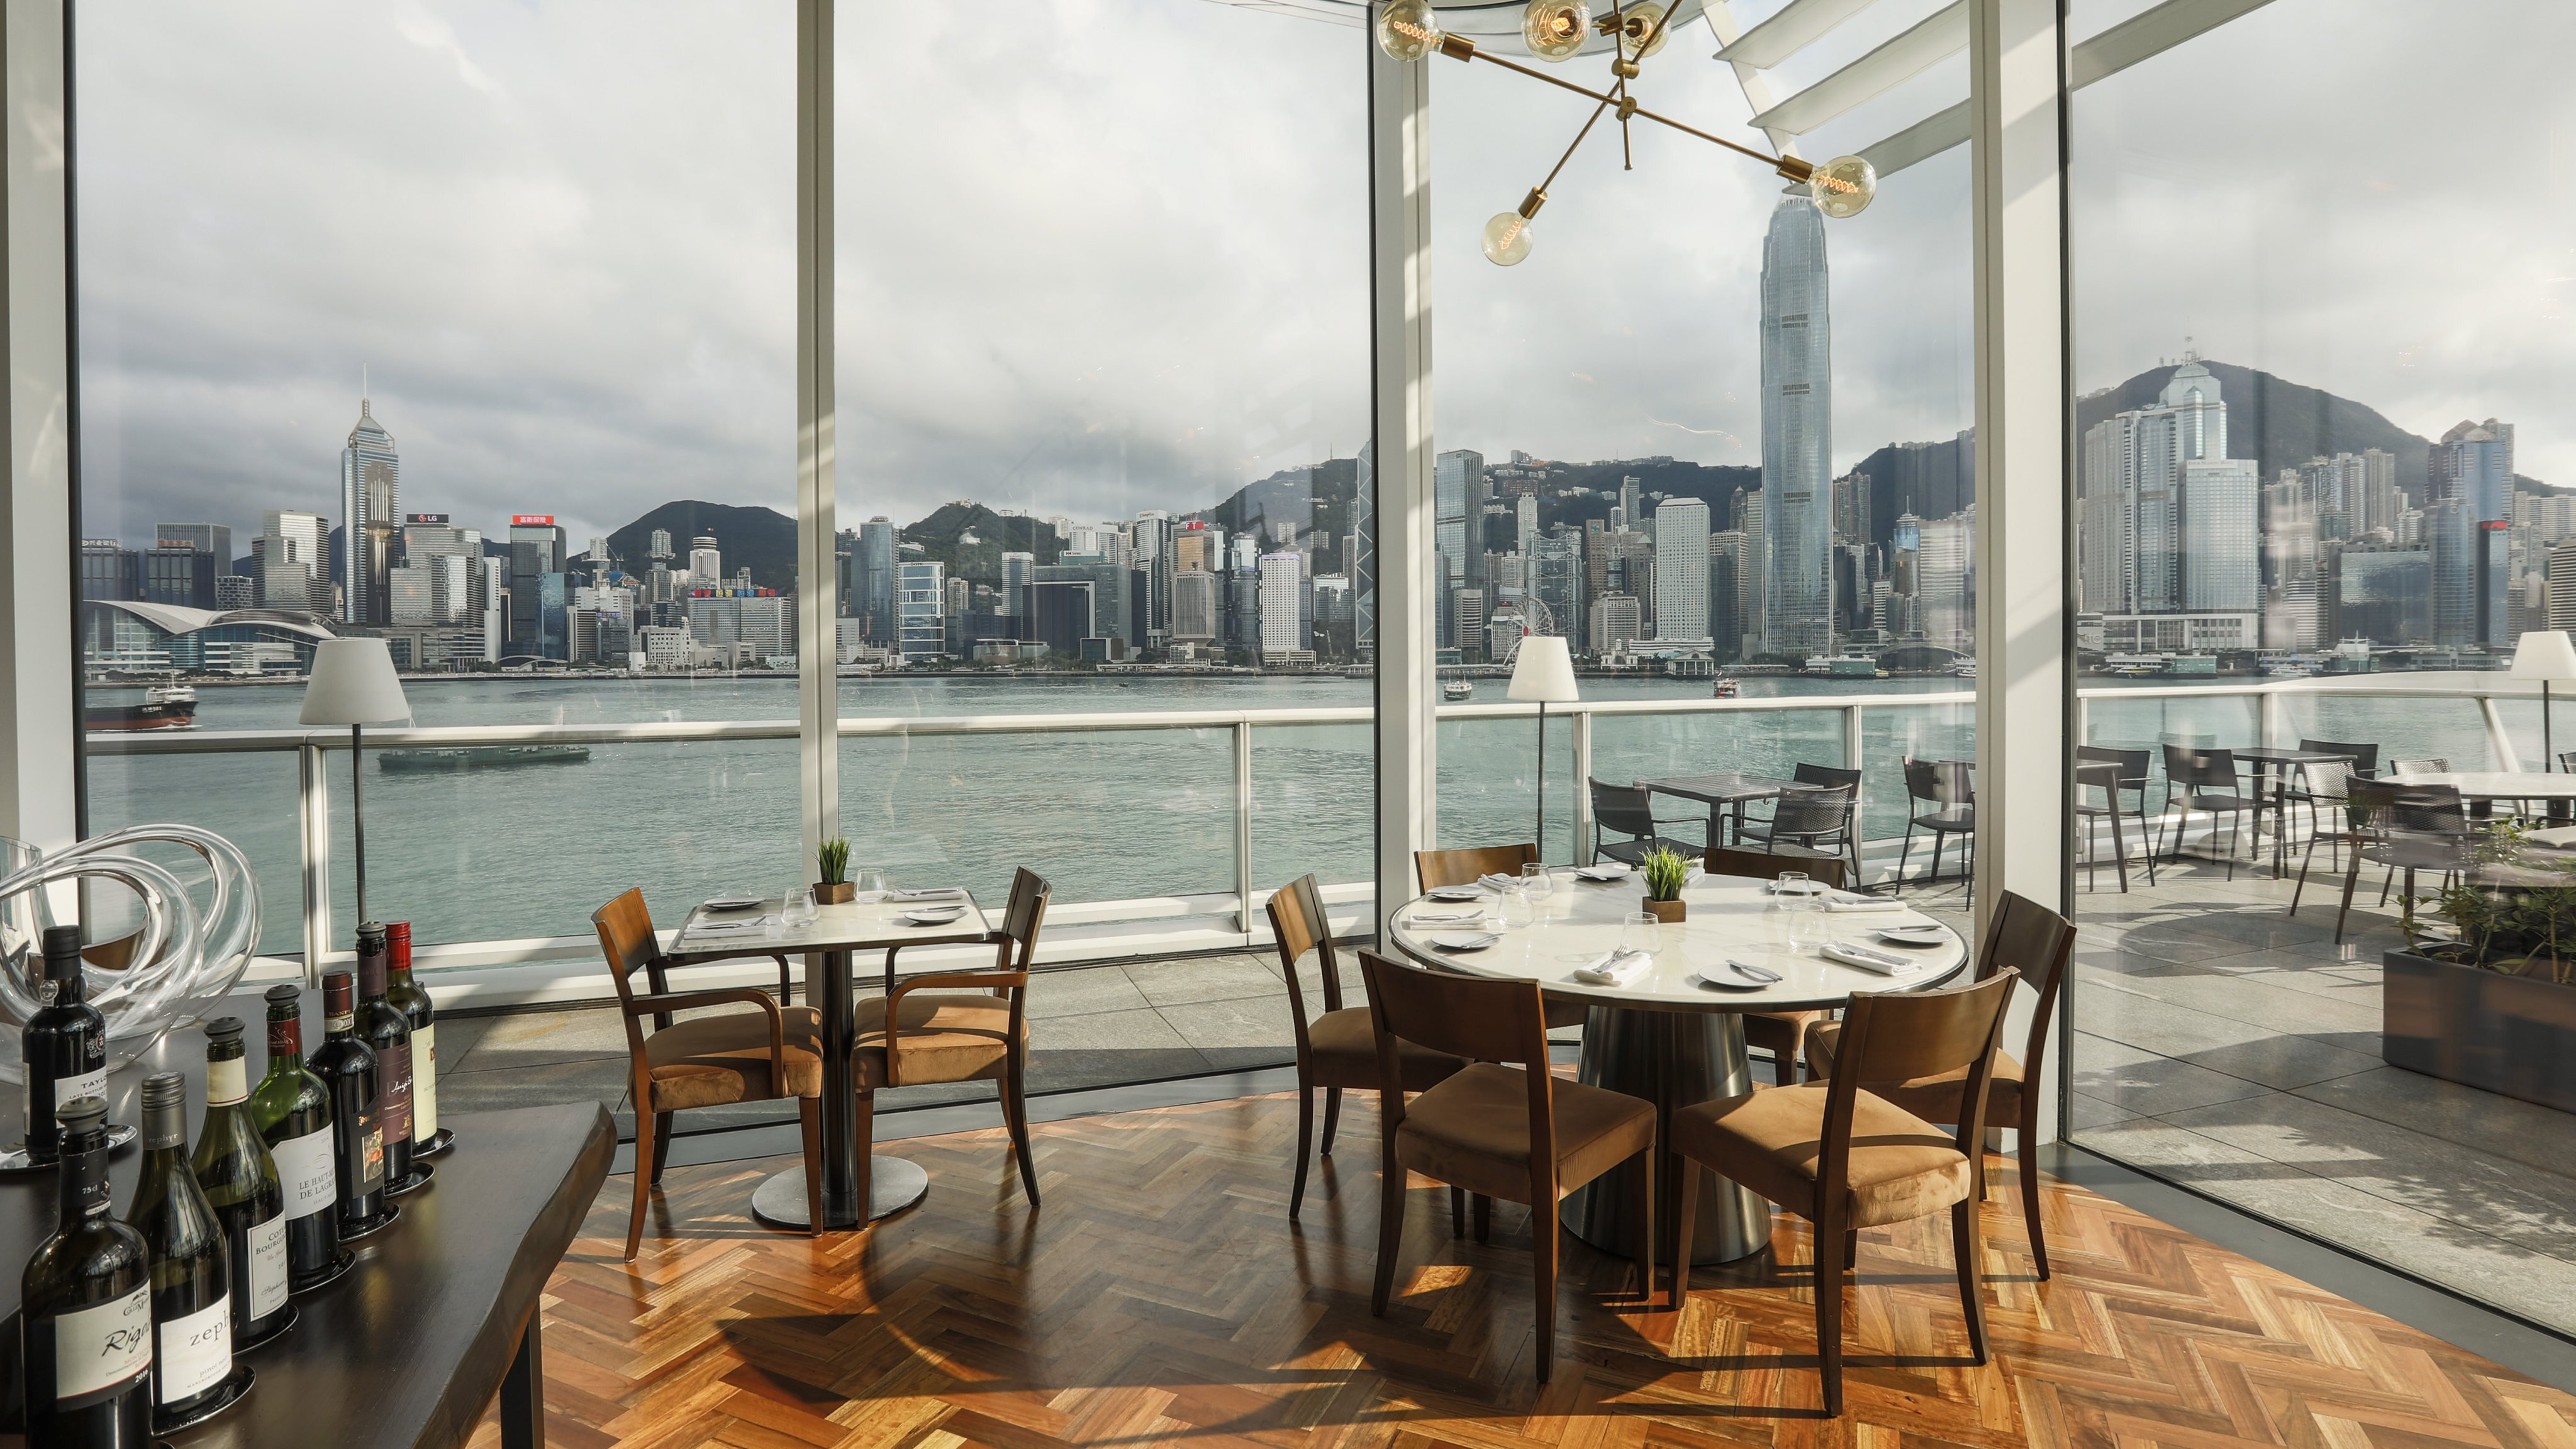 Harbourside Gril lives up to its name with a suitably epic view across Hong Kong’s Victoria Harbour. Photo: Handout